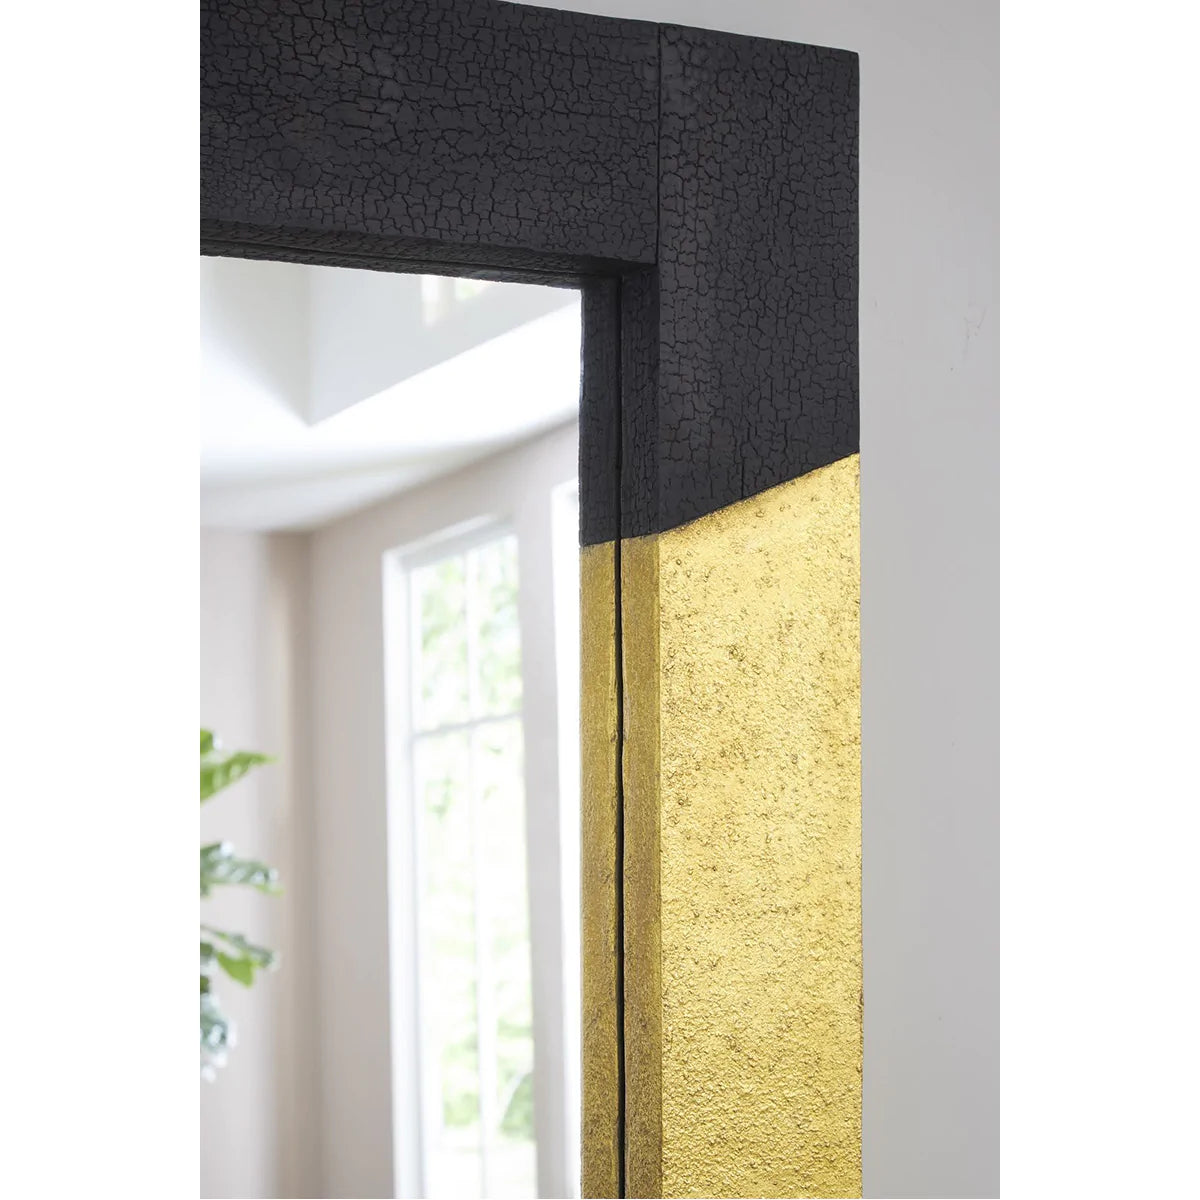 Phillips Collection Scorched Black and Gold Mirror